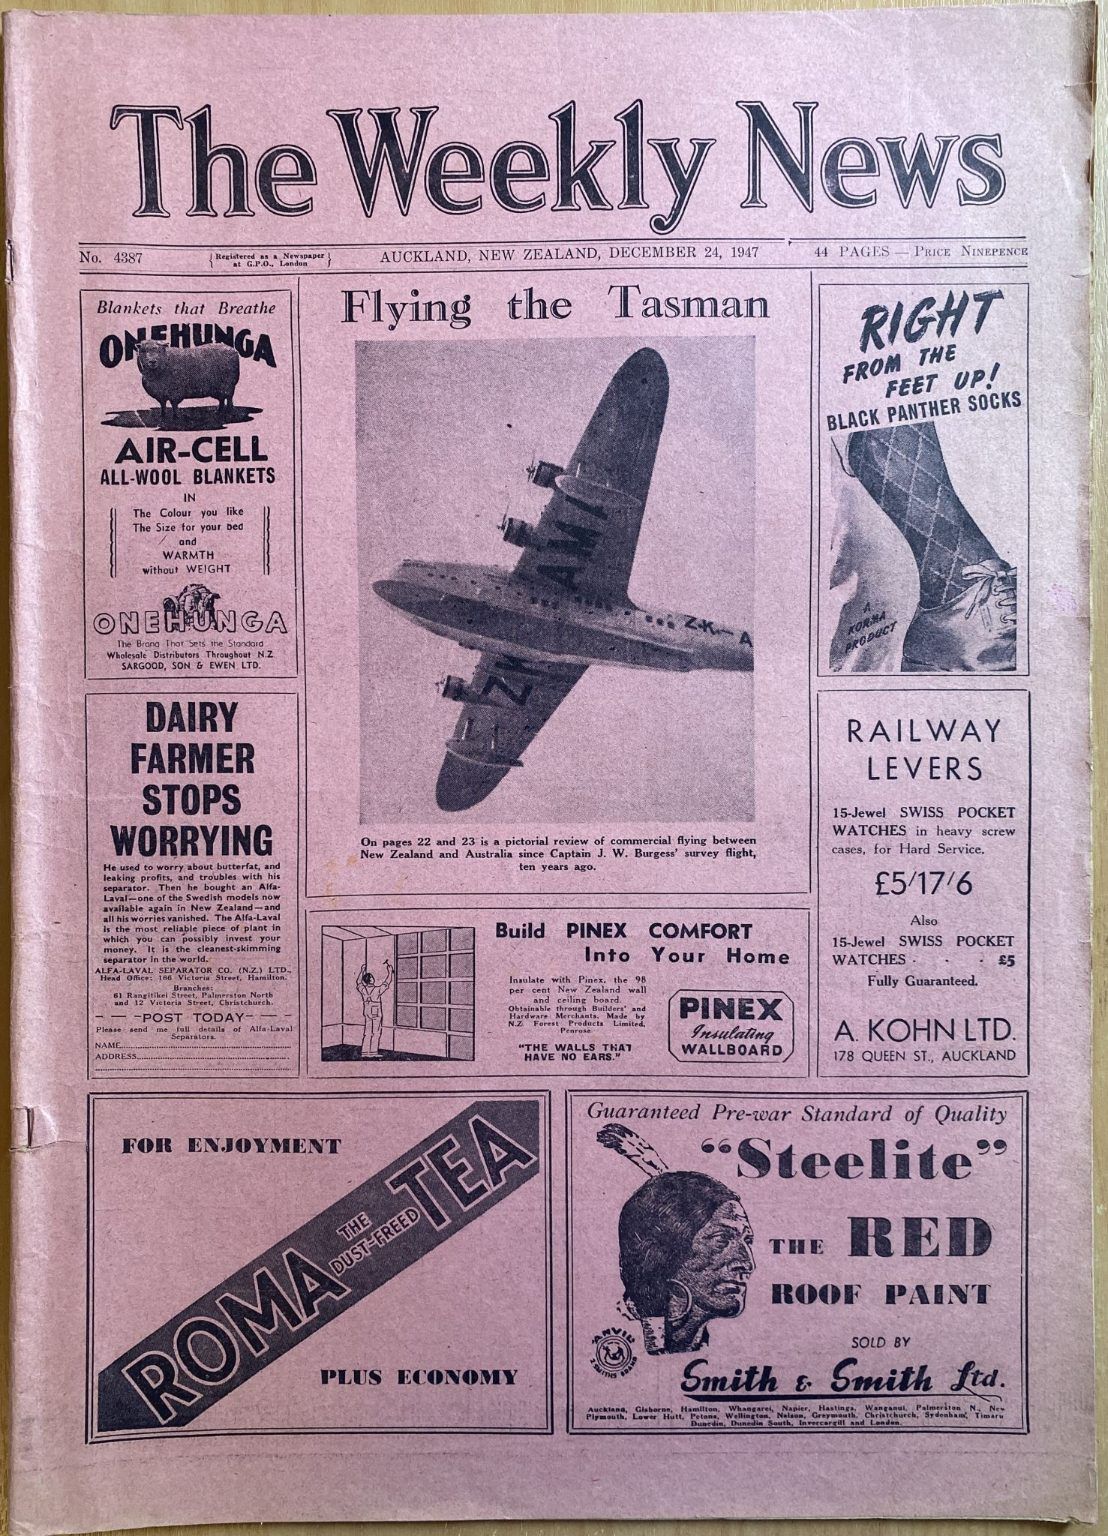 OLD NEWSPAPER: The Weekly News, No. 4387, 24 December 1947